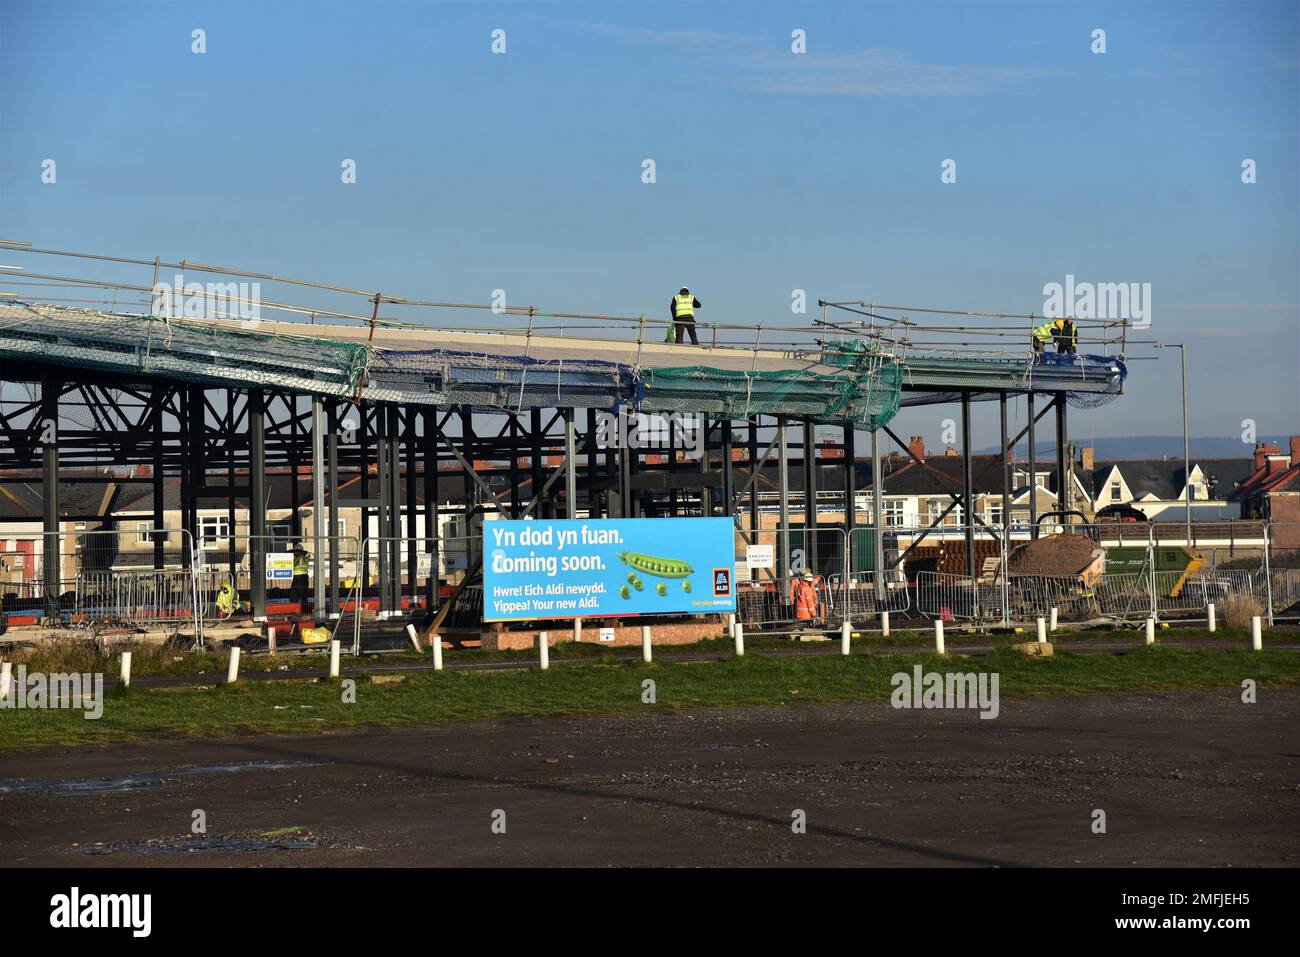 Pictures show a new ADLI discount superstore being constructed at the Salt Lake site, Porthcawl, Bridgend, South Wales. Stock Photo